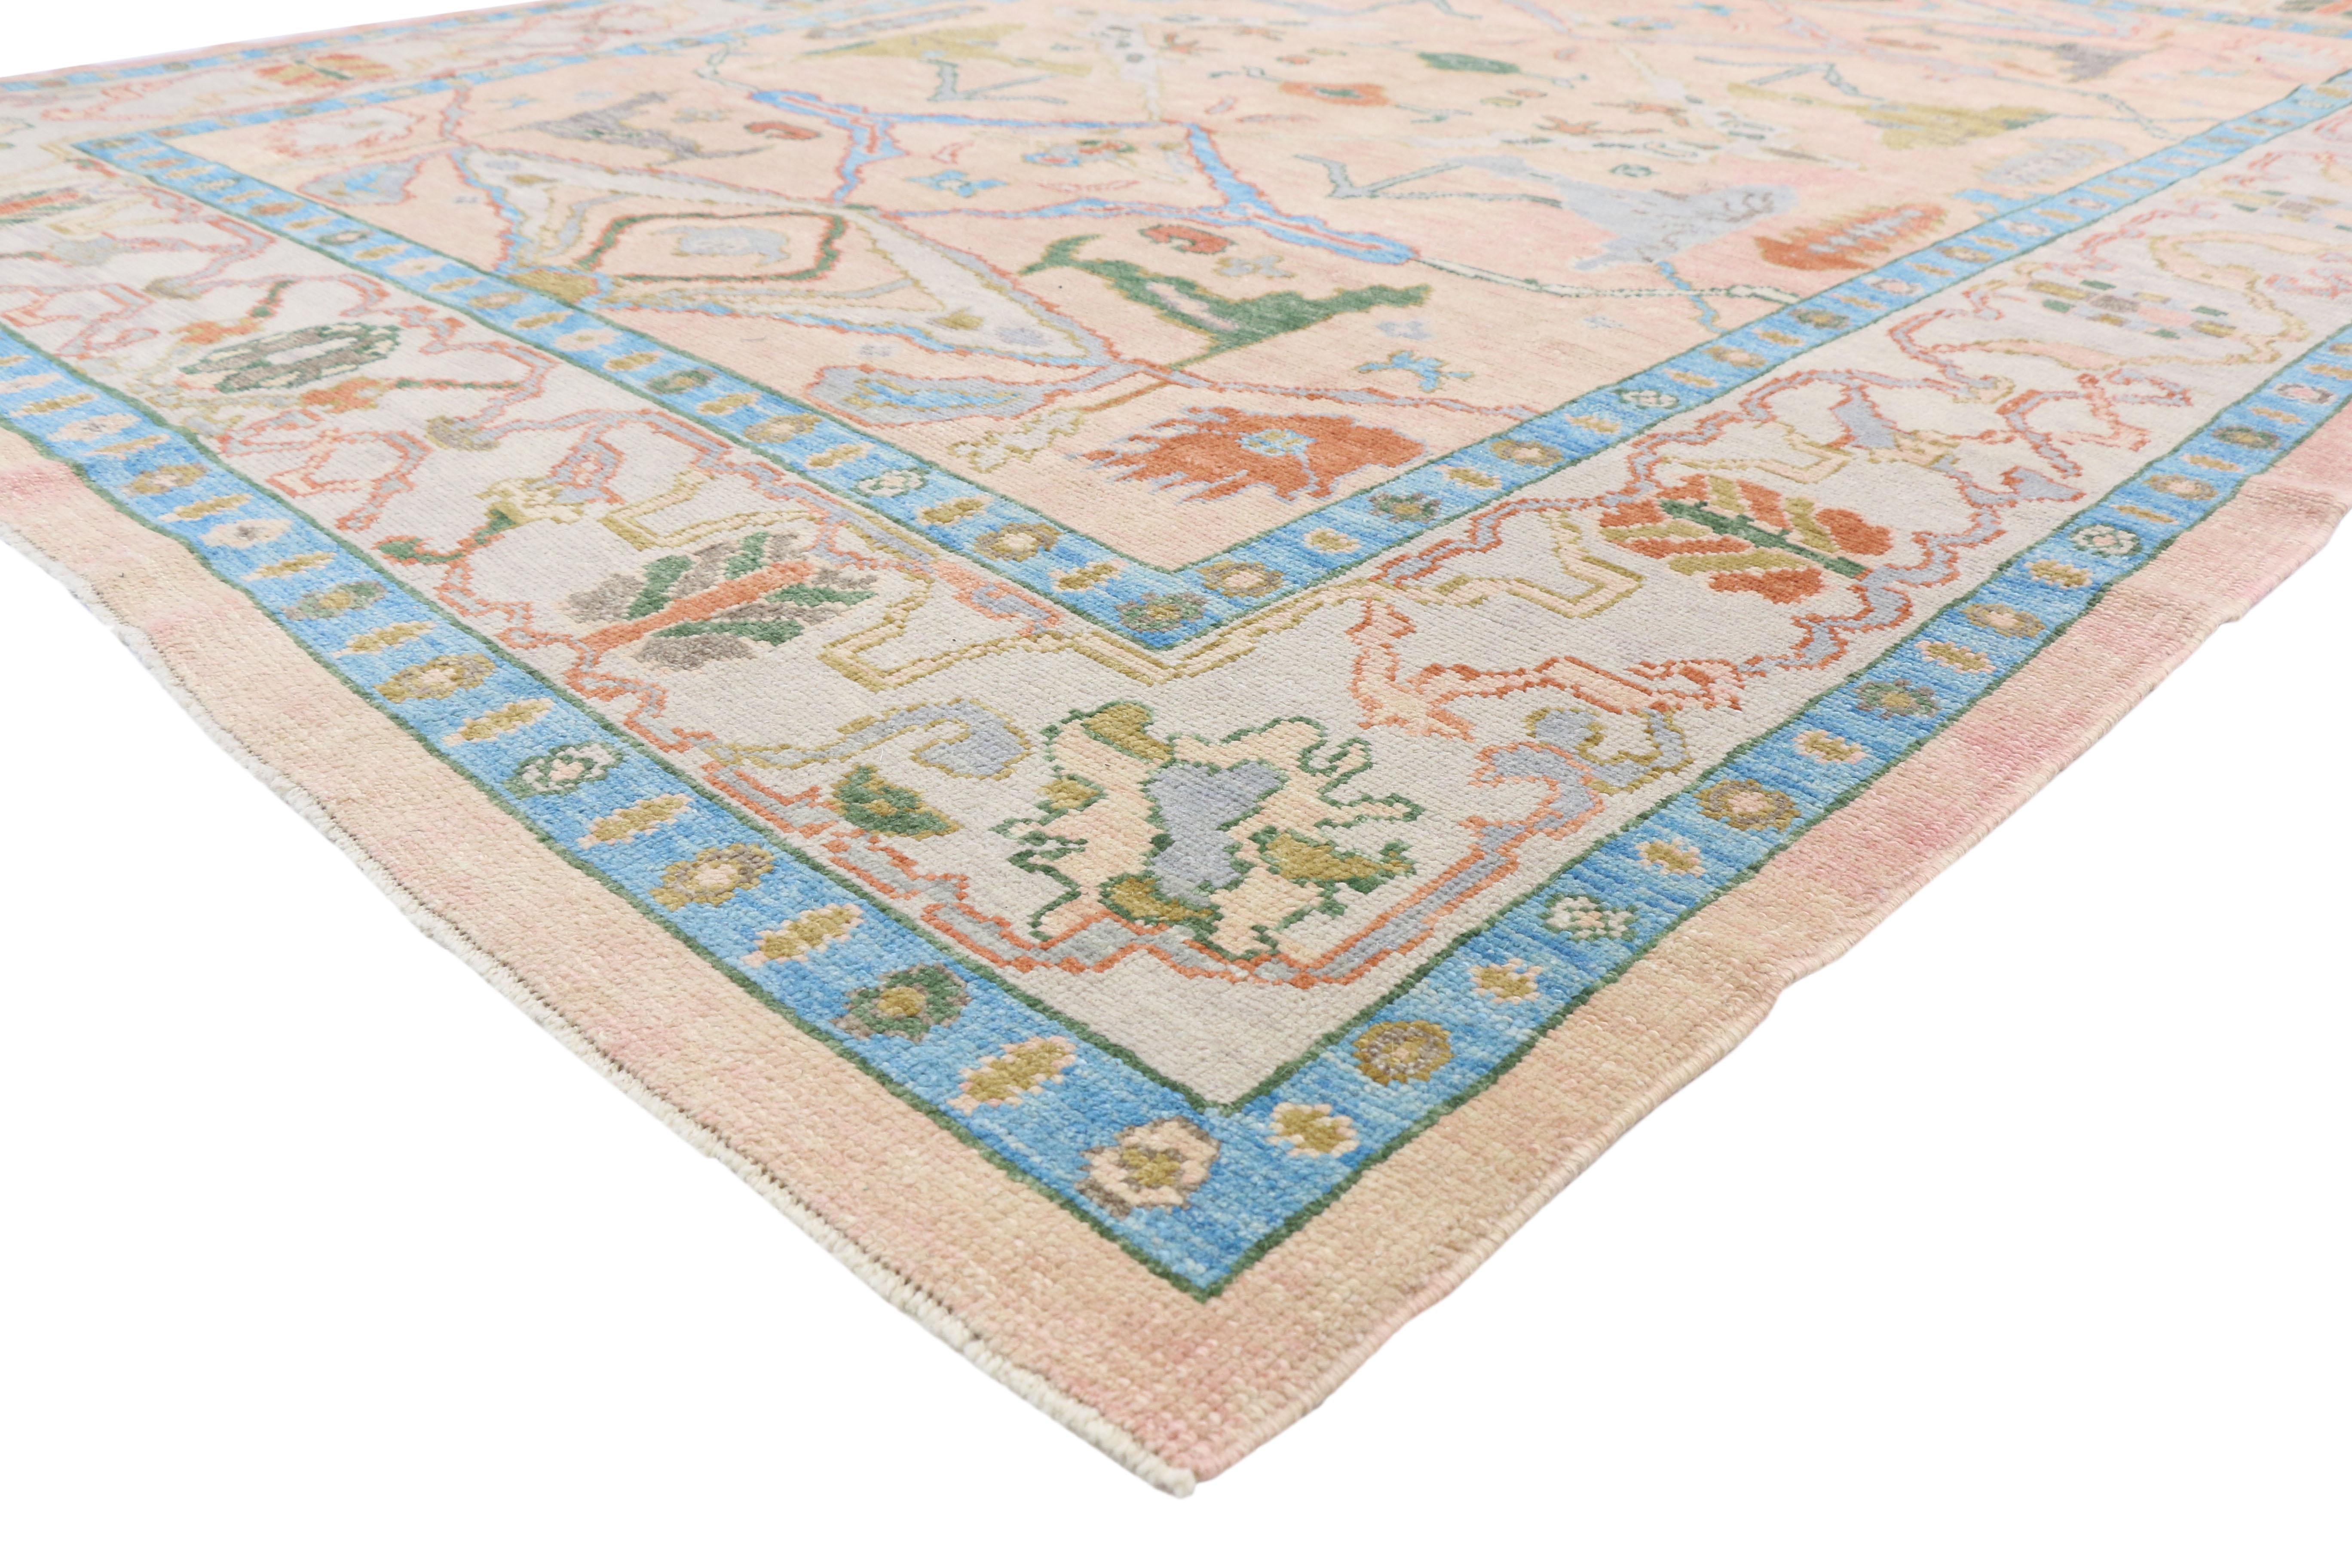 52427, new contemporary Turkish Oushak rug with Memphis style and pastel colors. Soft pastel hues and inspired by an alluring early 19th century Sultanabad style design, this hand knotted wool Contemporary Turkish Oushak rug is a statement of